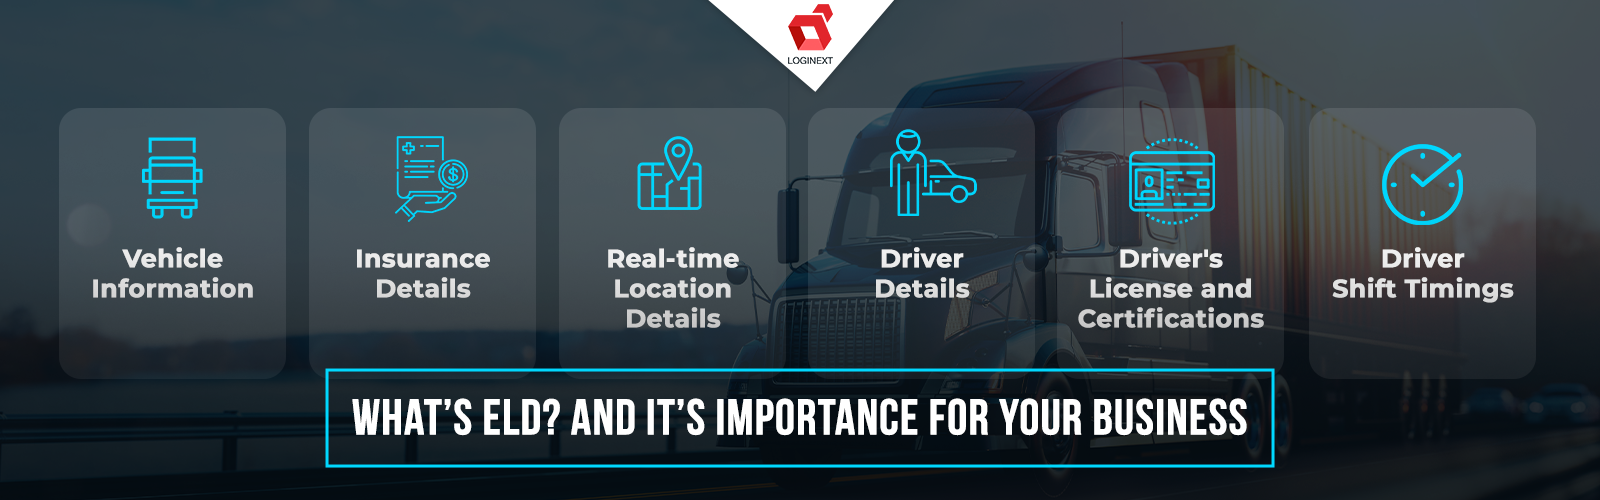 What’s ELD? And It’s Importance for your business